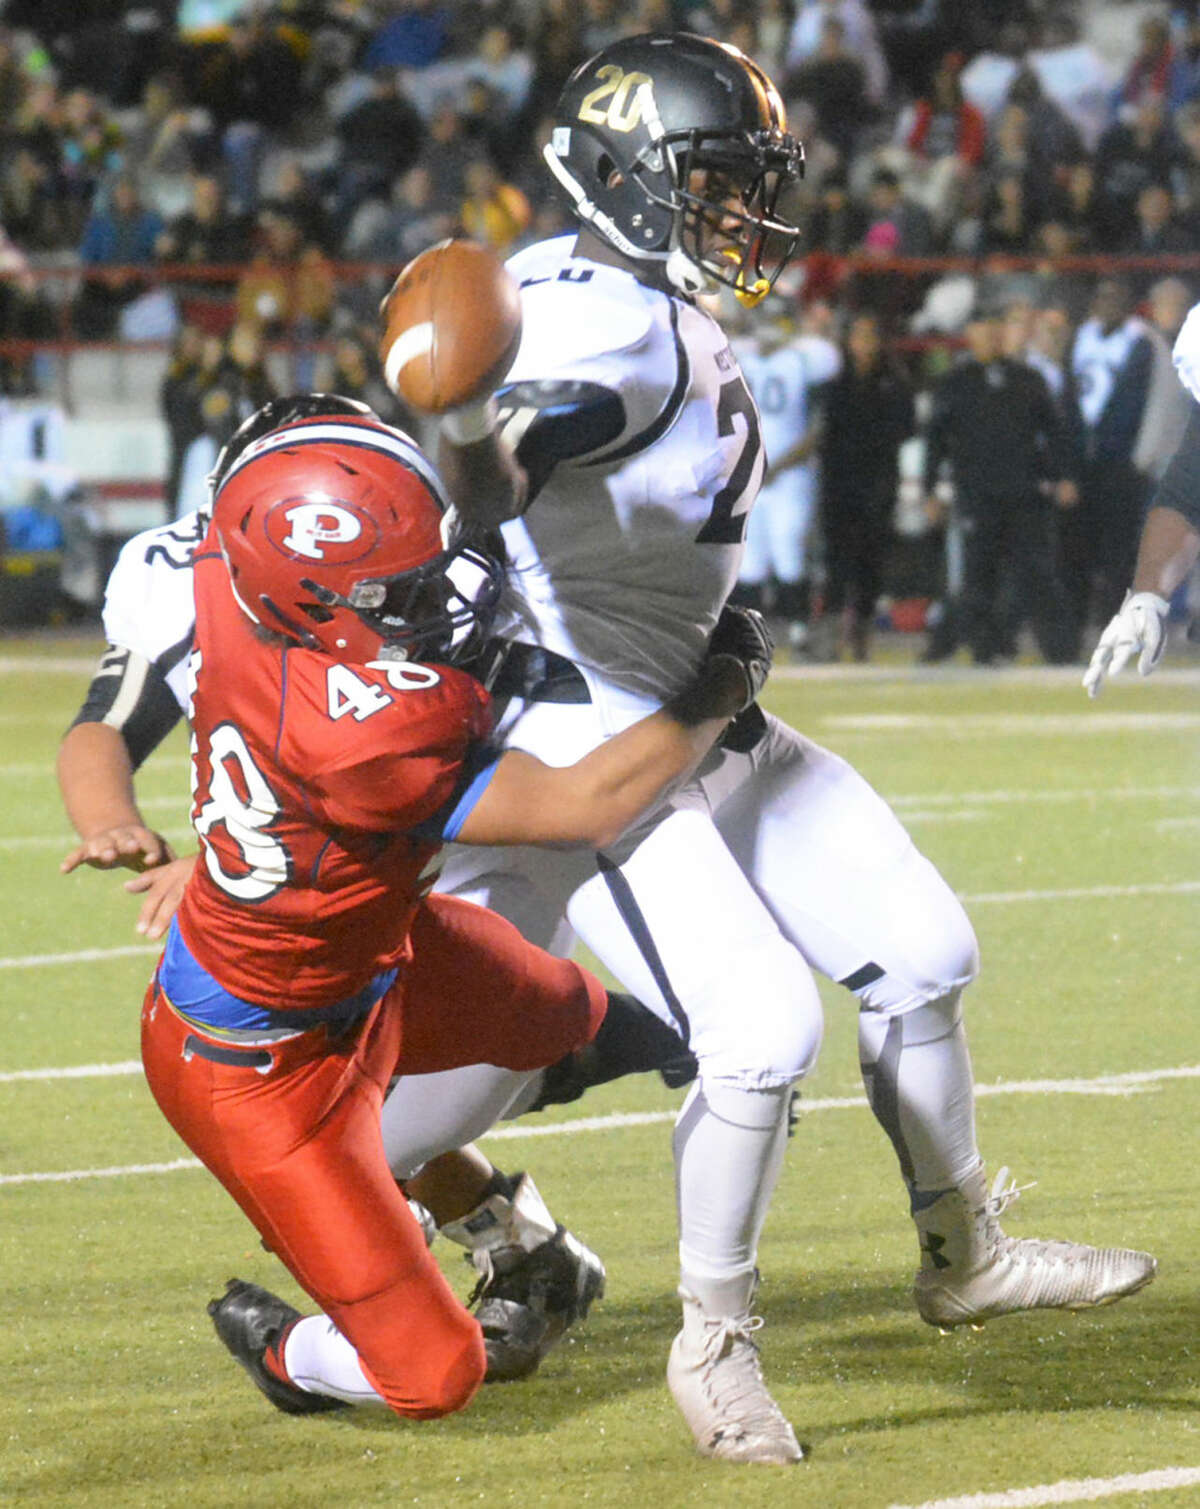 Plainview defensive end J'ryn Vela (48) sacks the Lubbock High quarterback during the final regular-season football game. Vela was part of a veteran defensive unit that played solidly throughout the year.